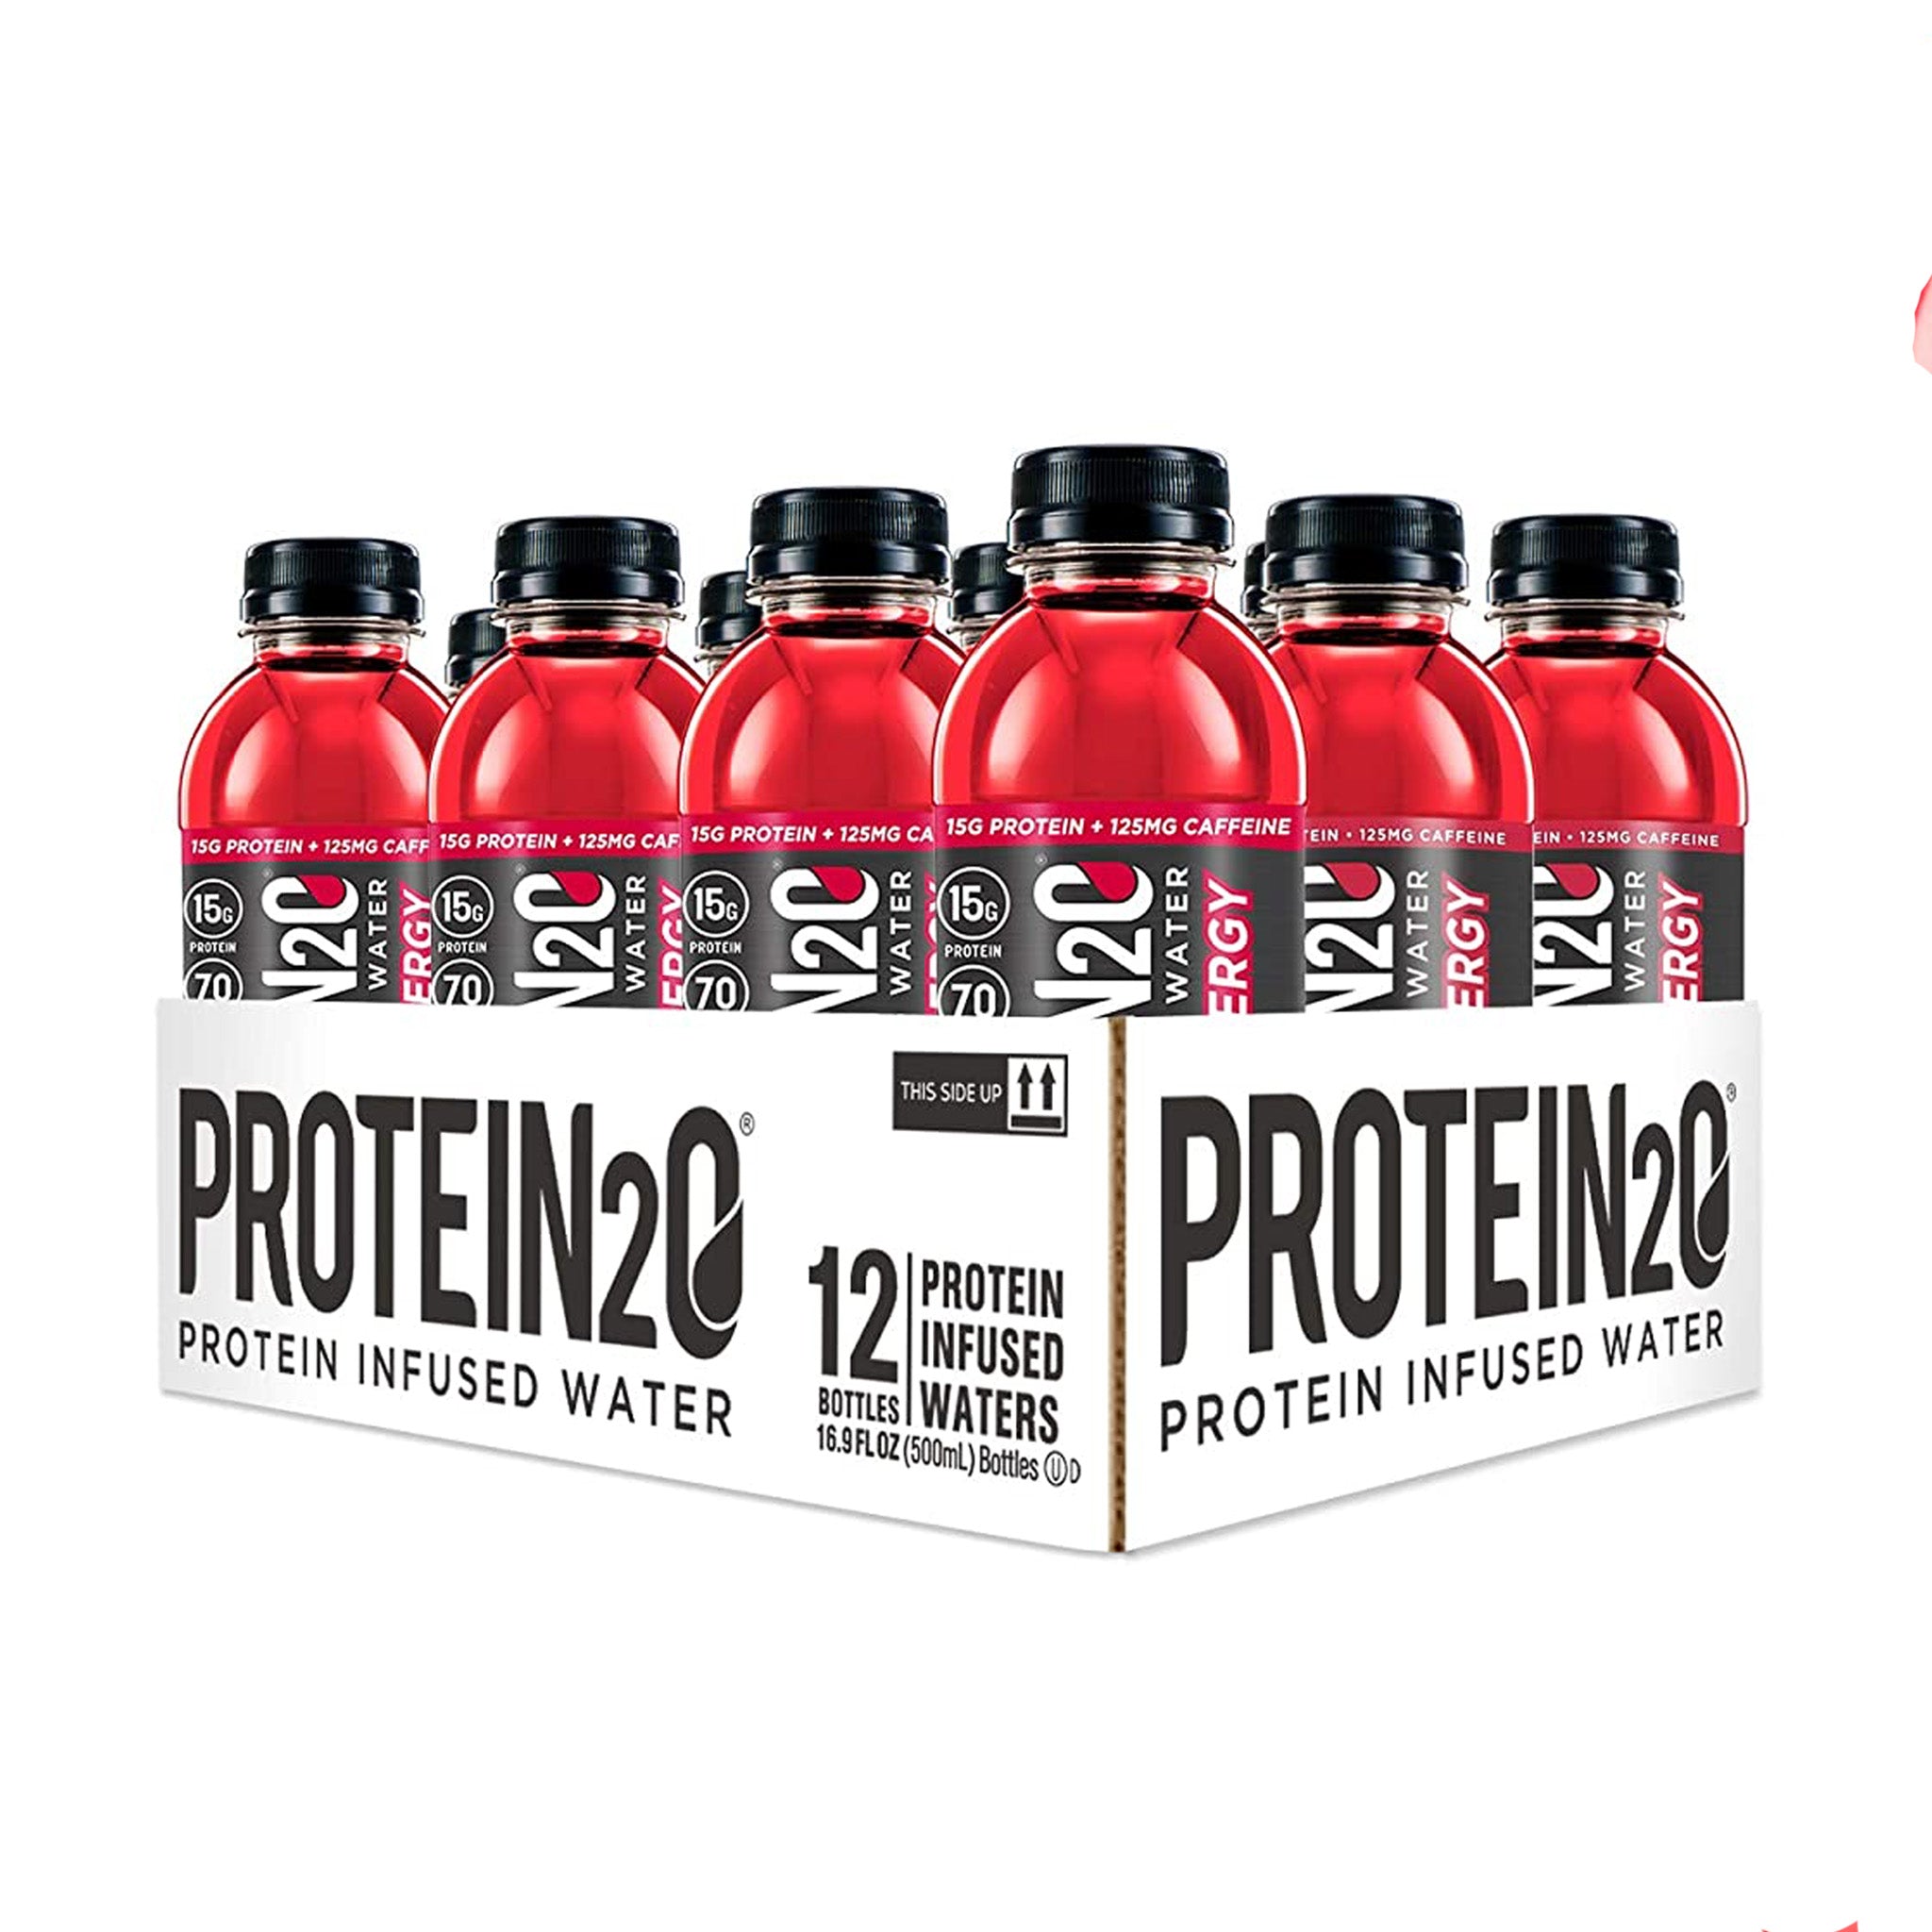 Protein 2O Infused Protein Water + Energy (12 Bttl)